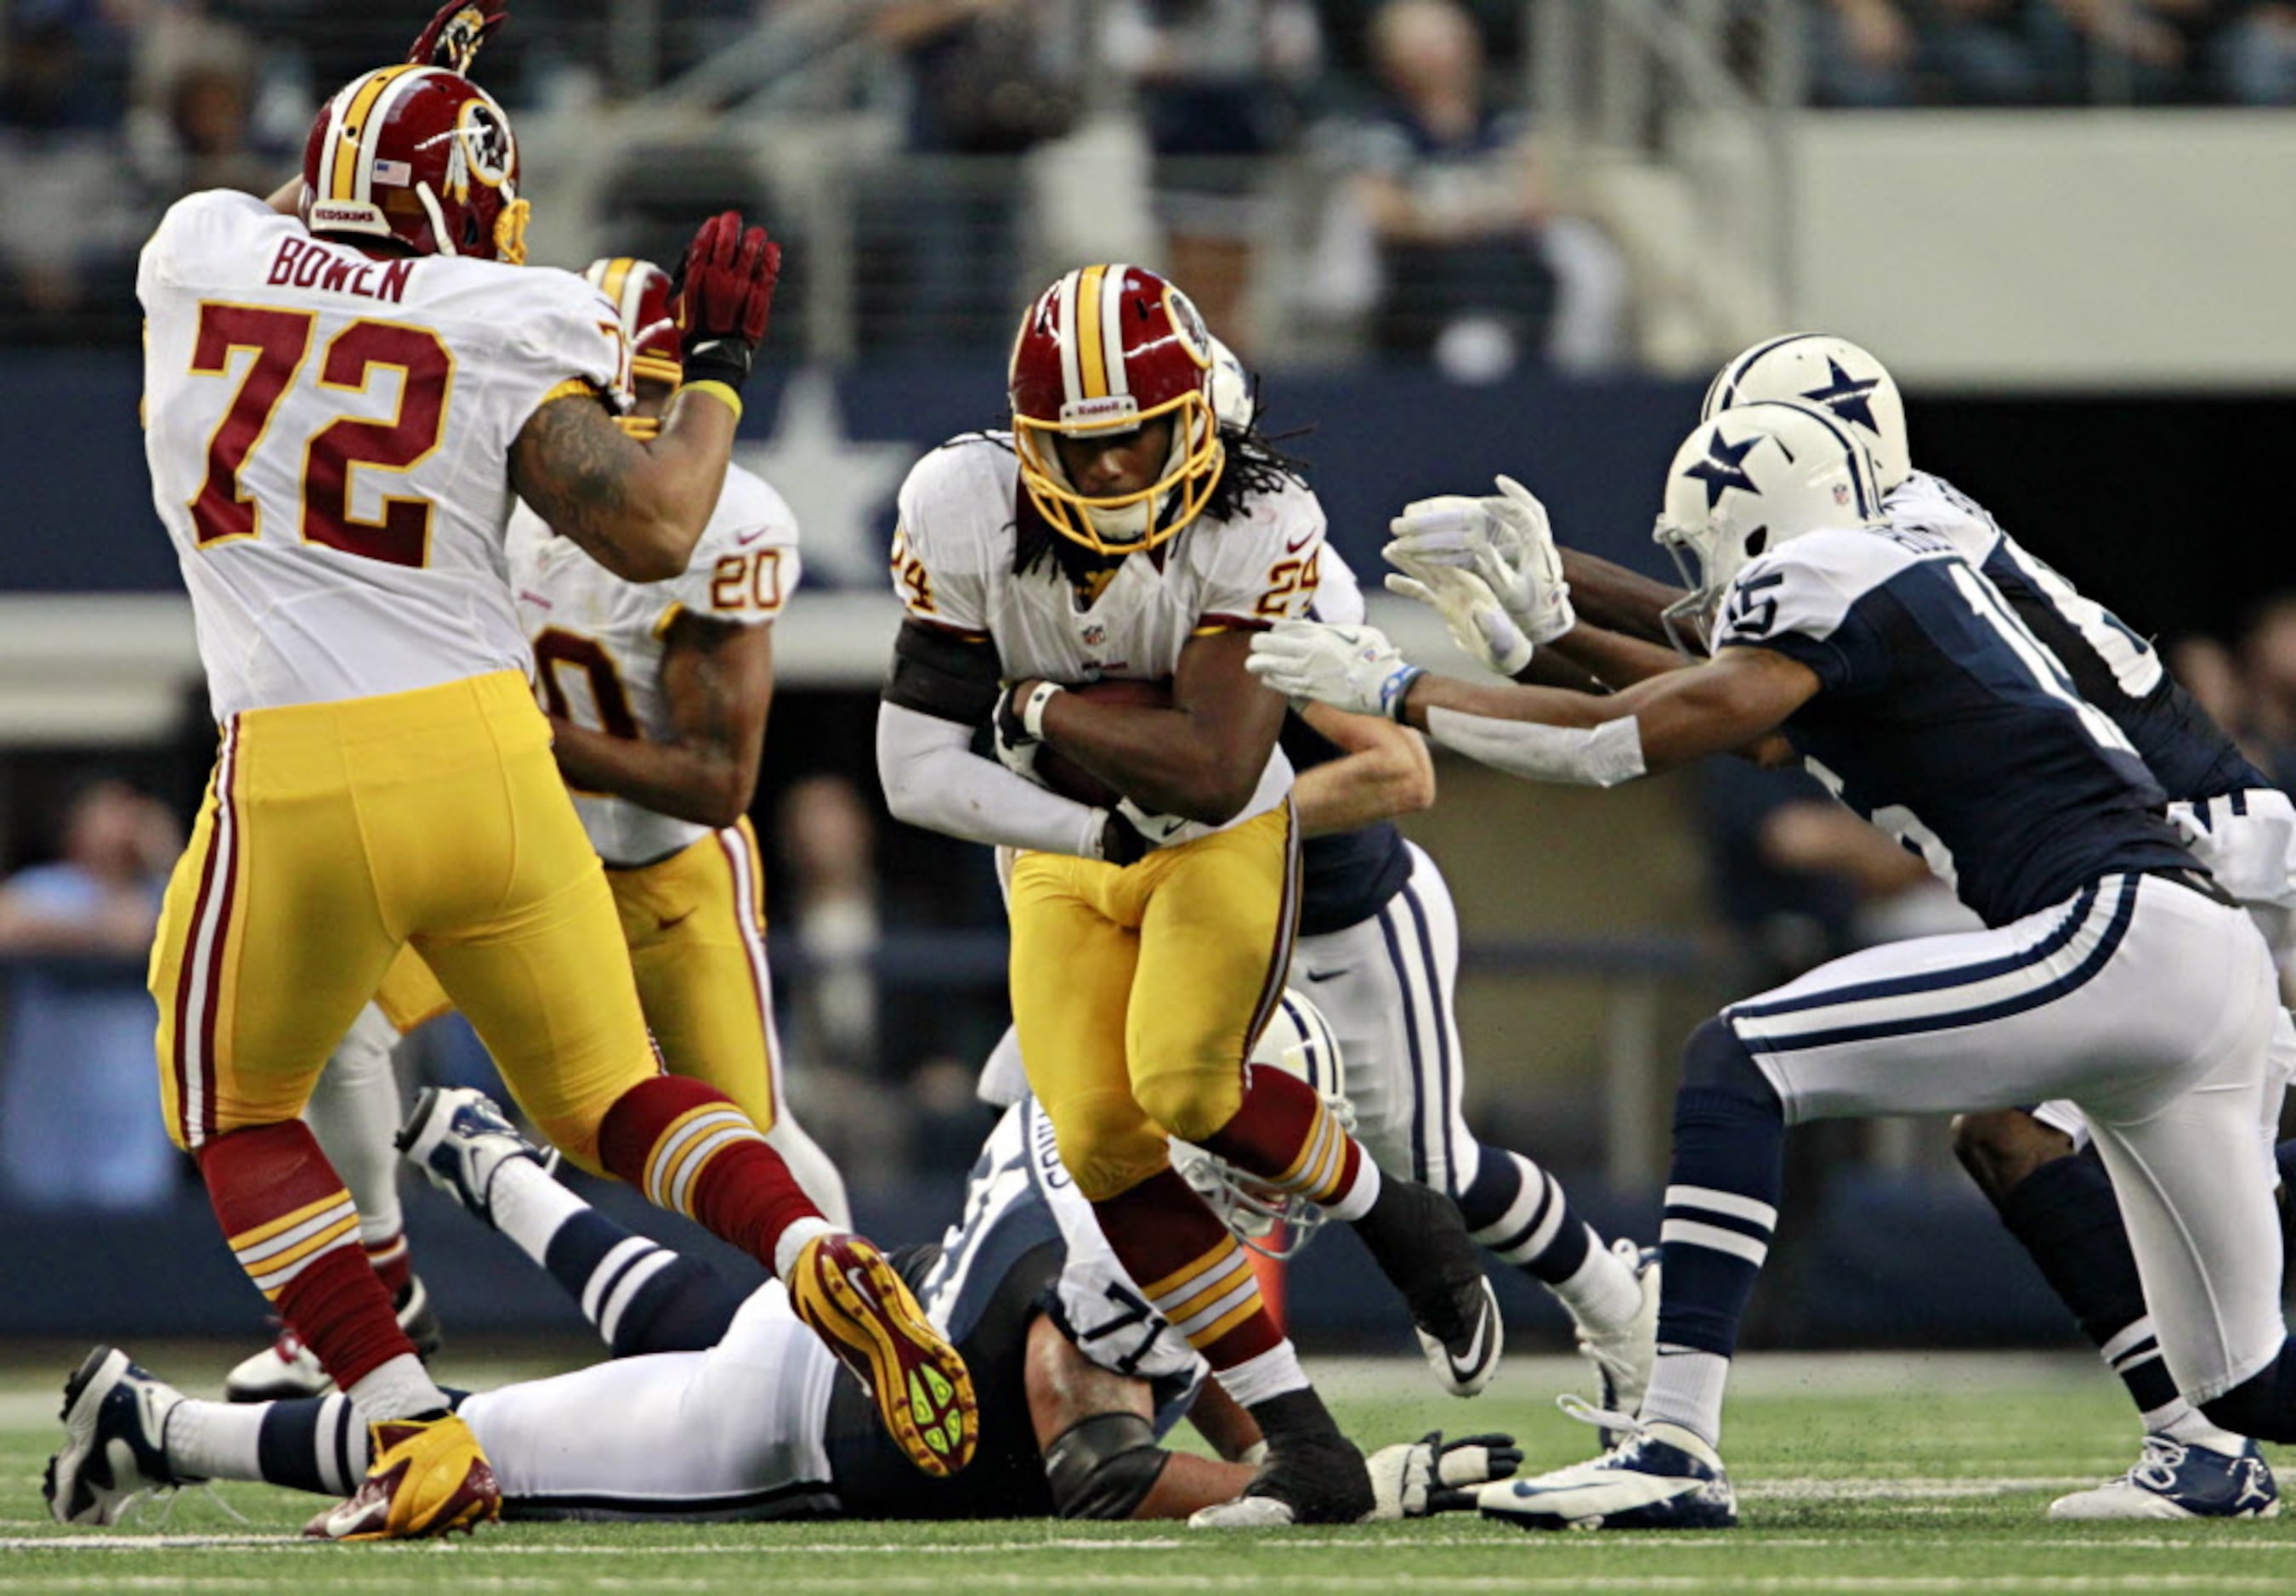 Redskins blow past Cowboys; playoff hopes done; sign Tony Romo now